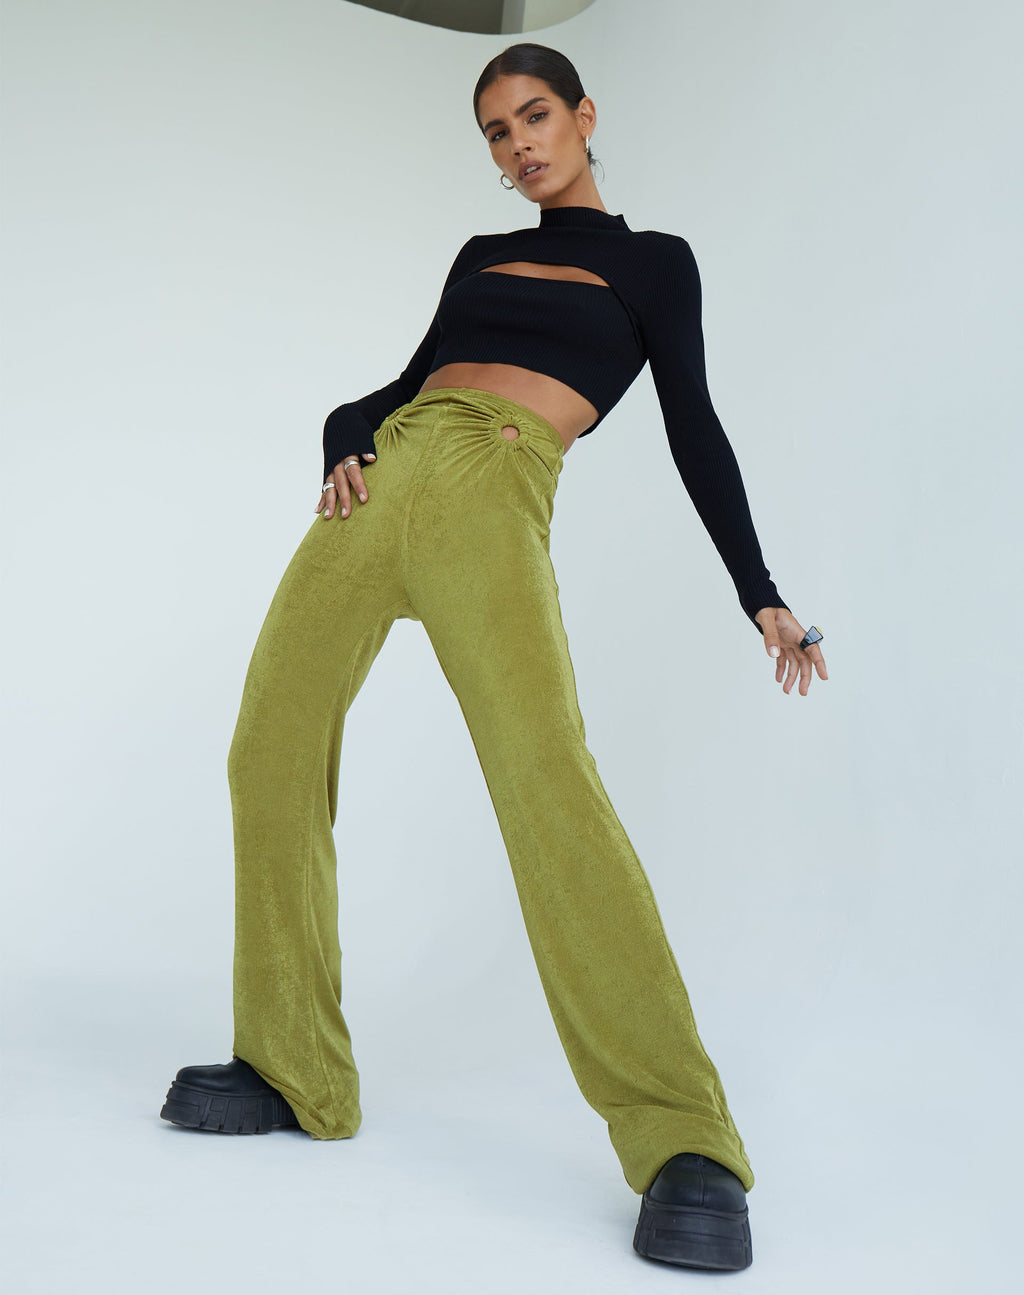 Sesaot Flare Trouser in Crepe Lime